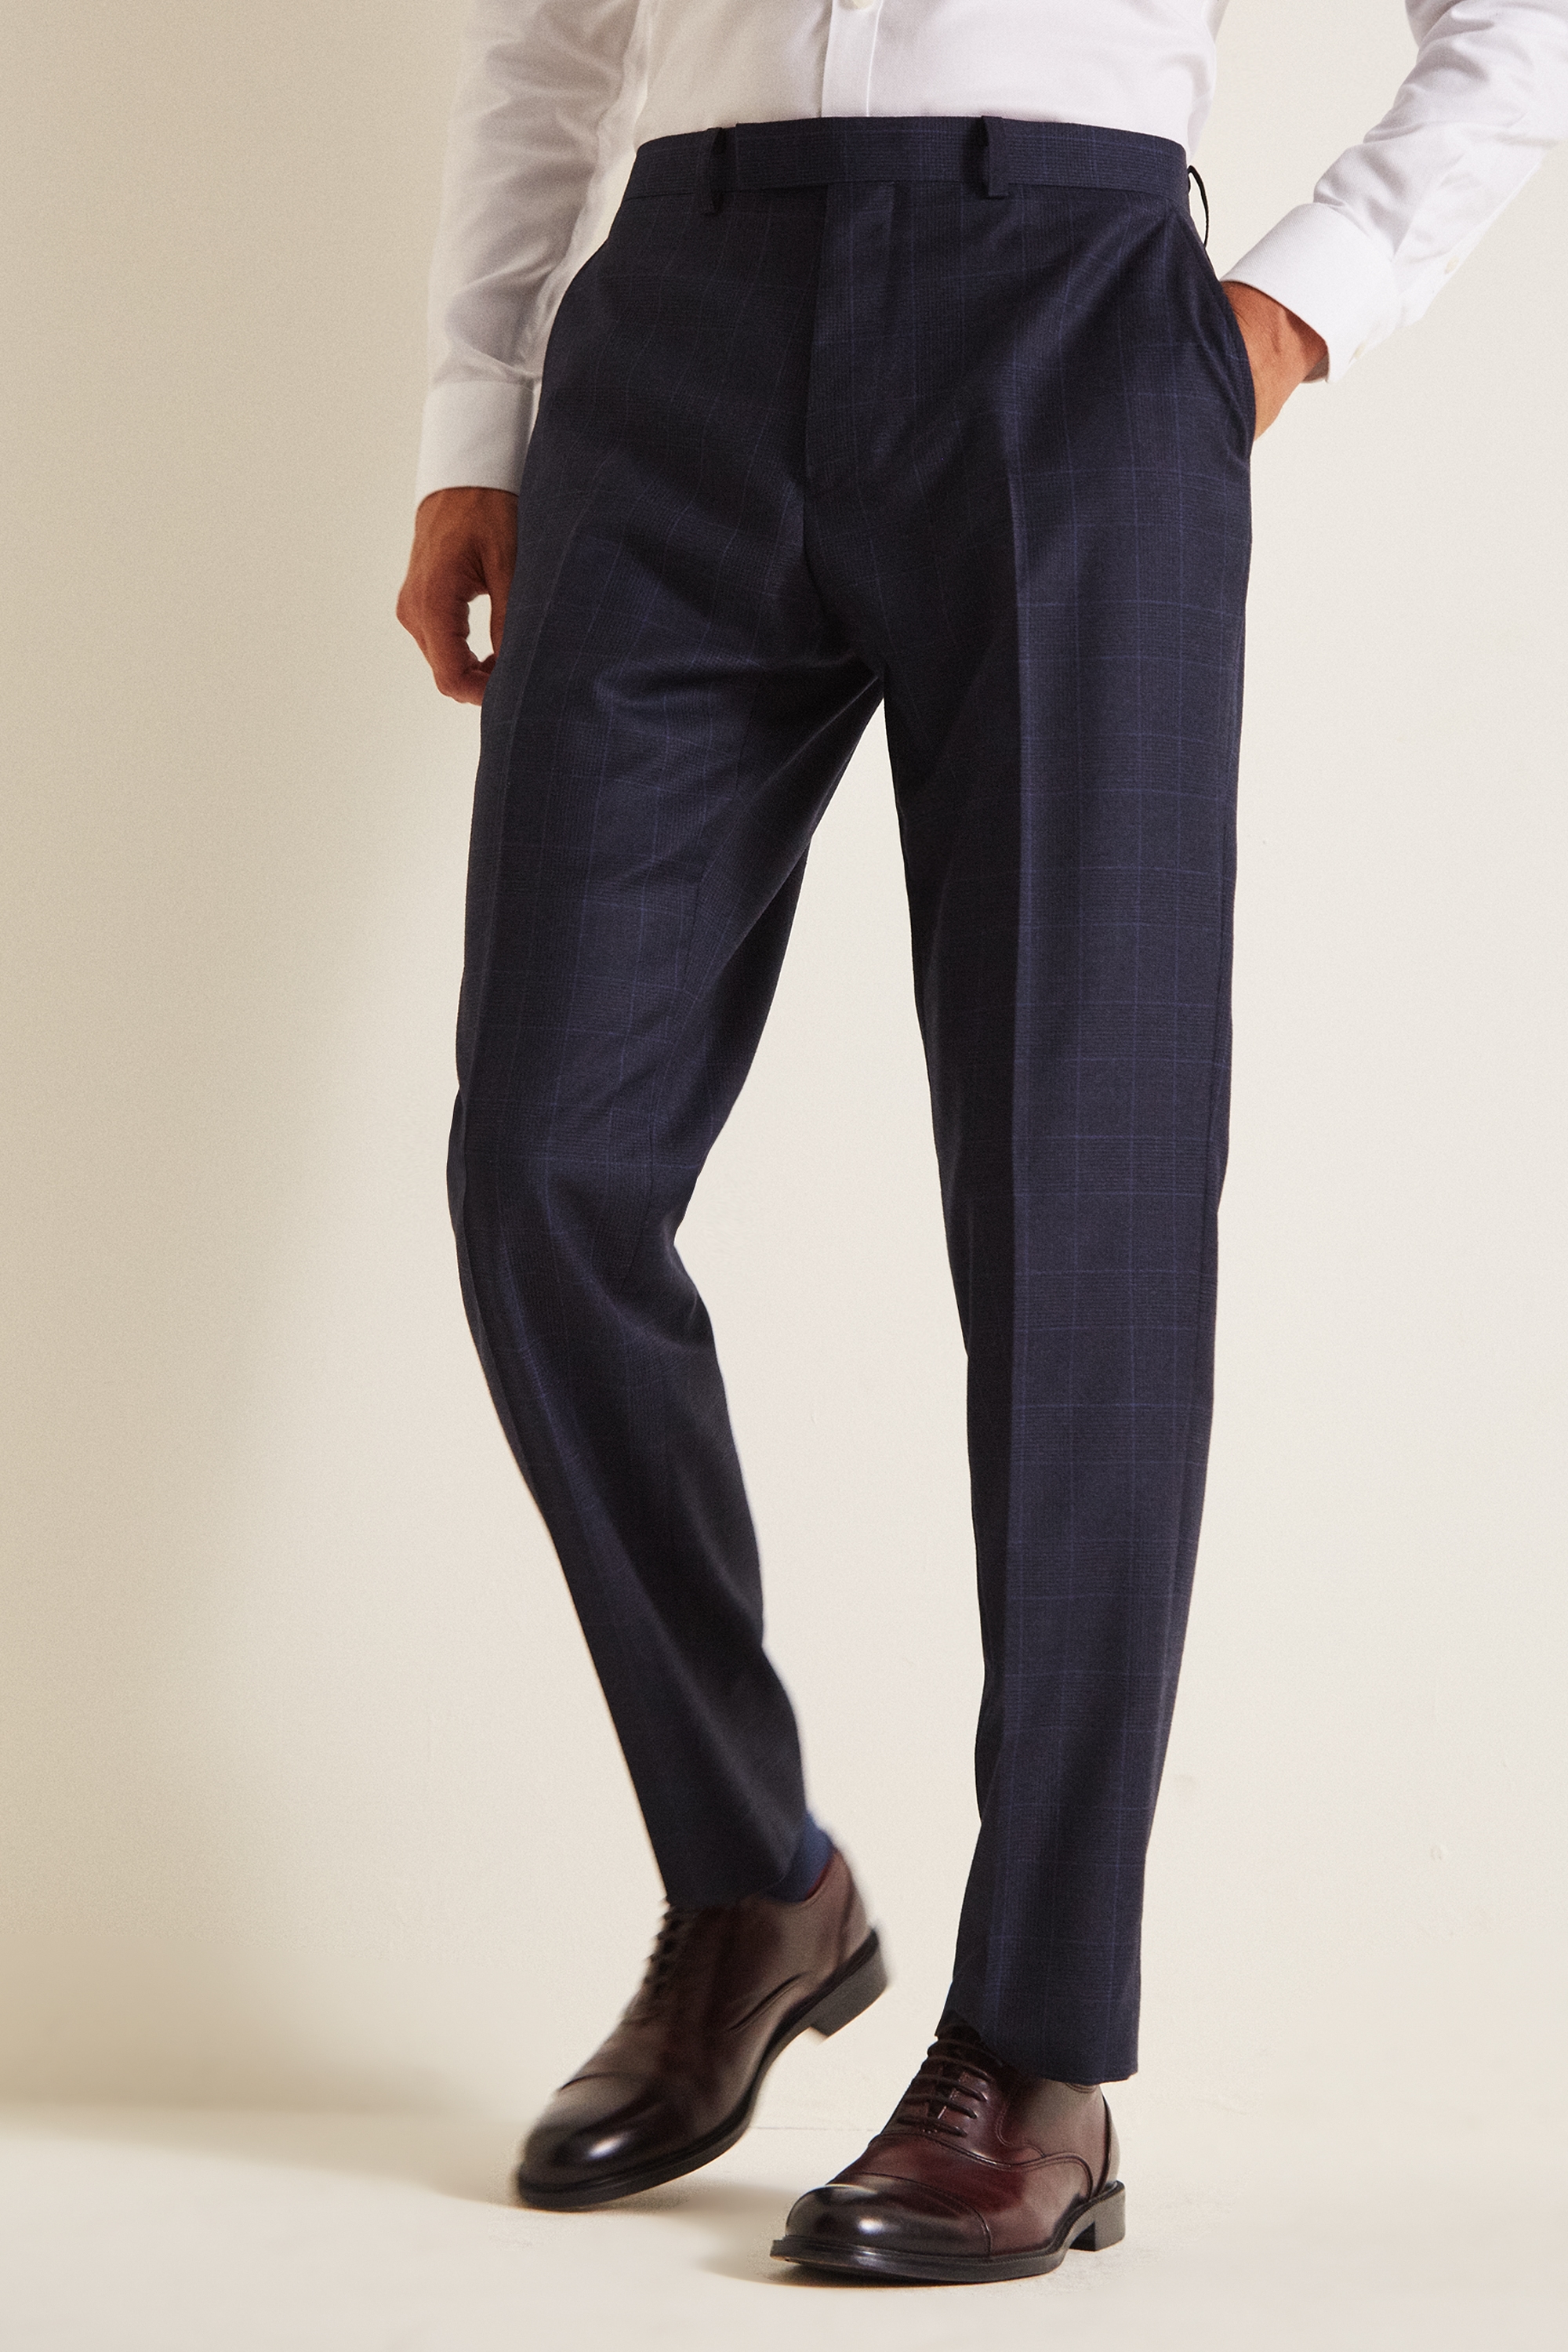 Savoy Taylors Guild Regular Fit Navy Check Trousers